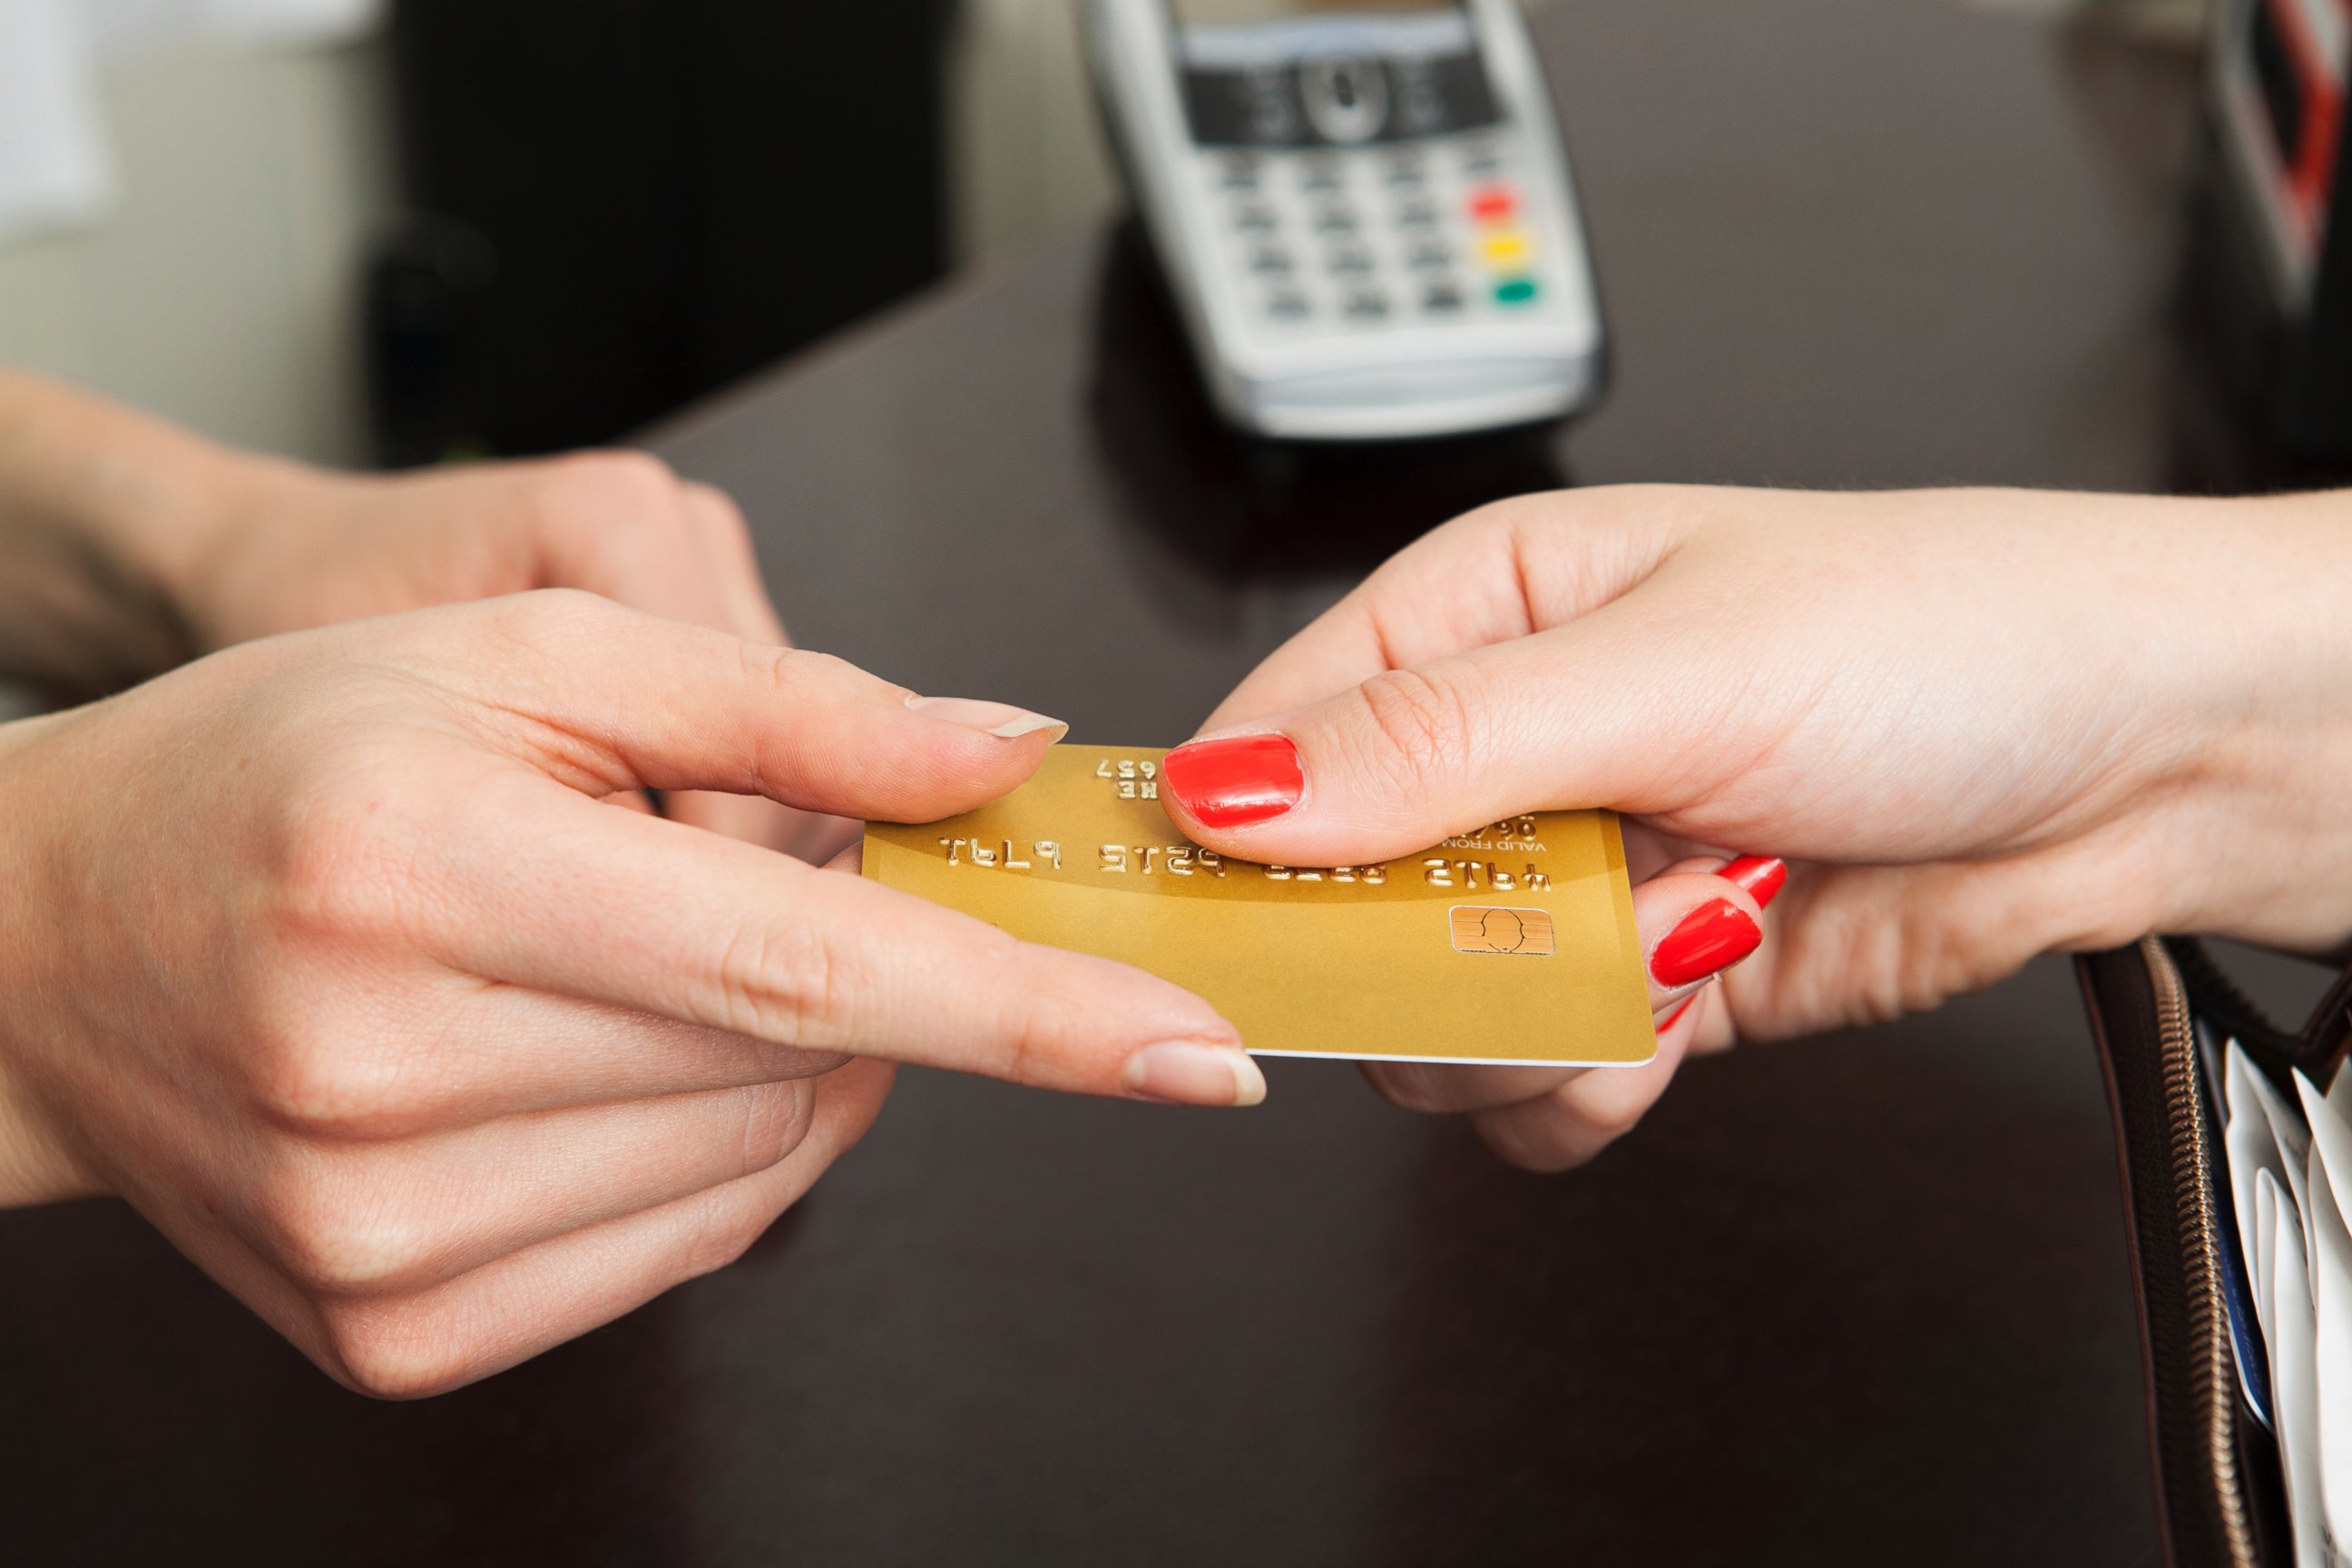 PHOTO: A woman hands over a credit card for payment.